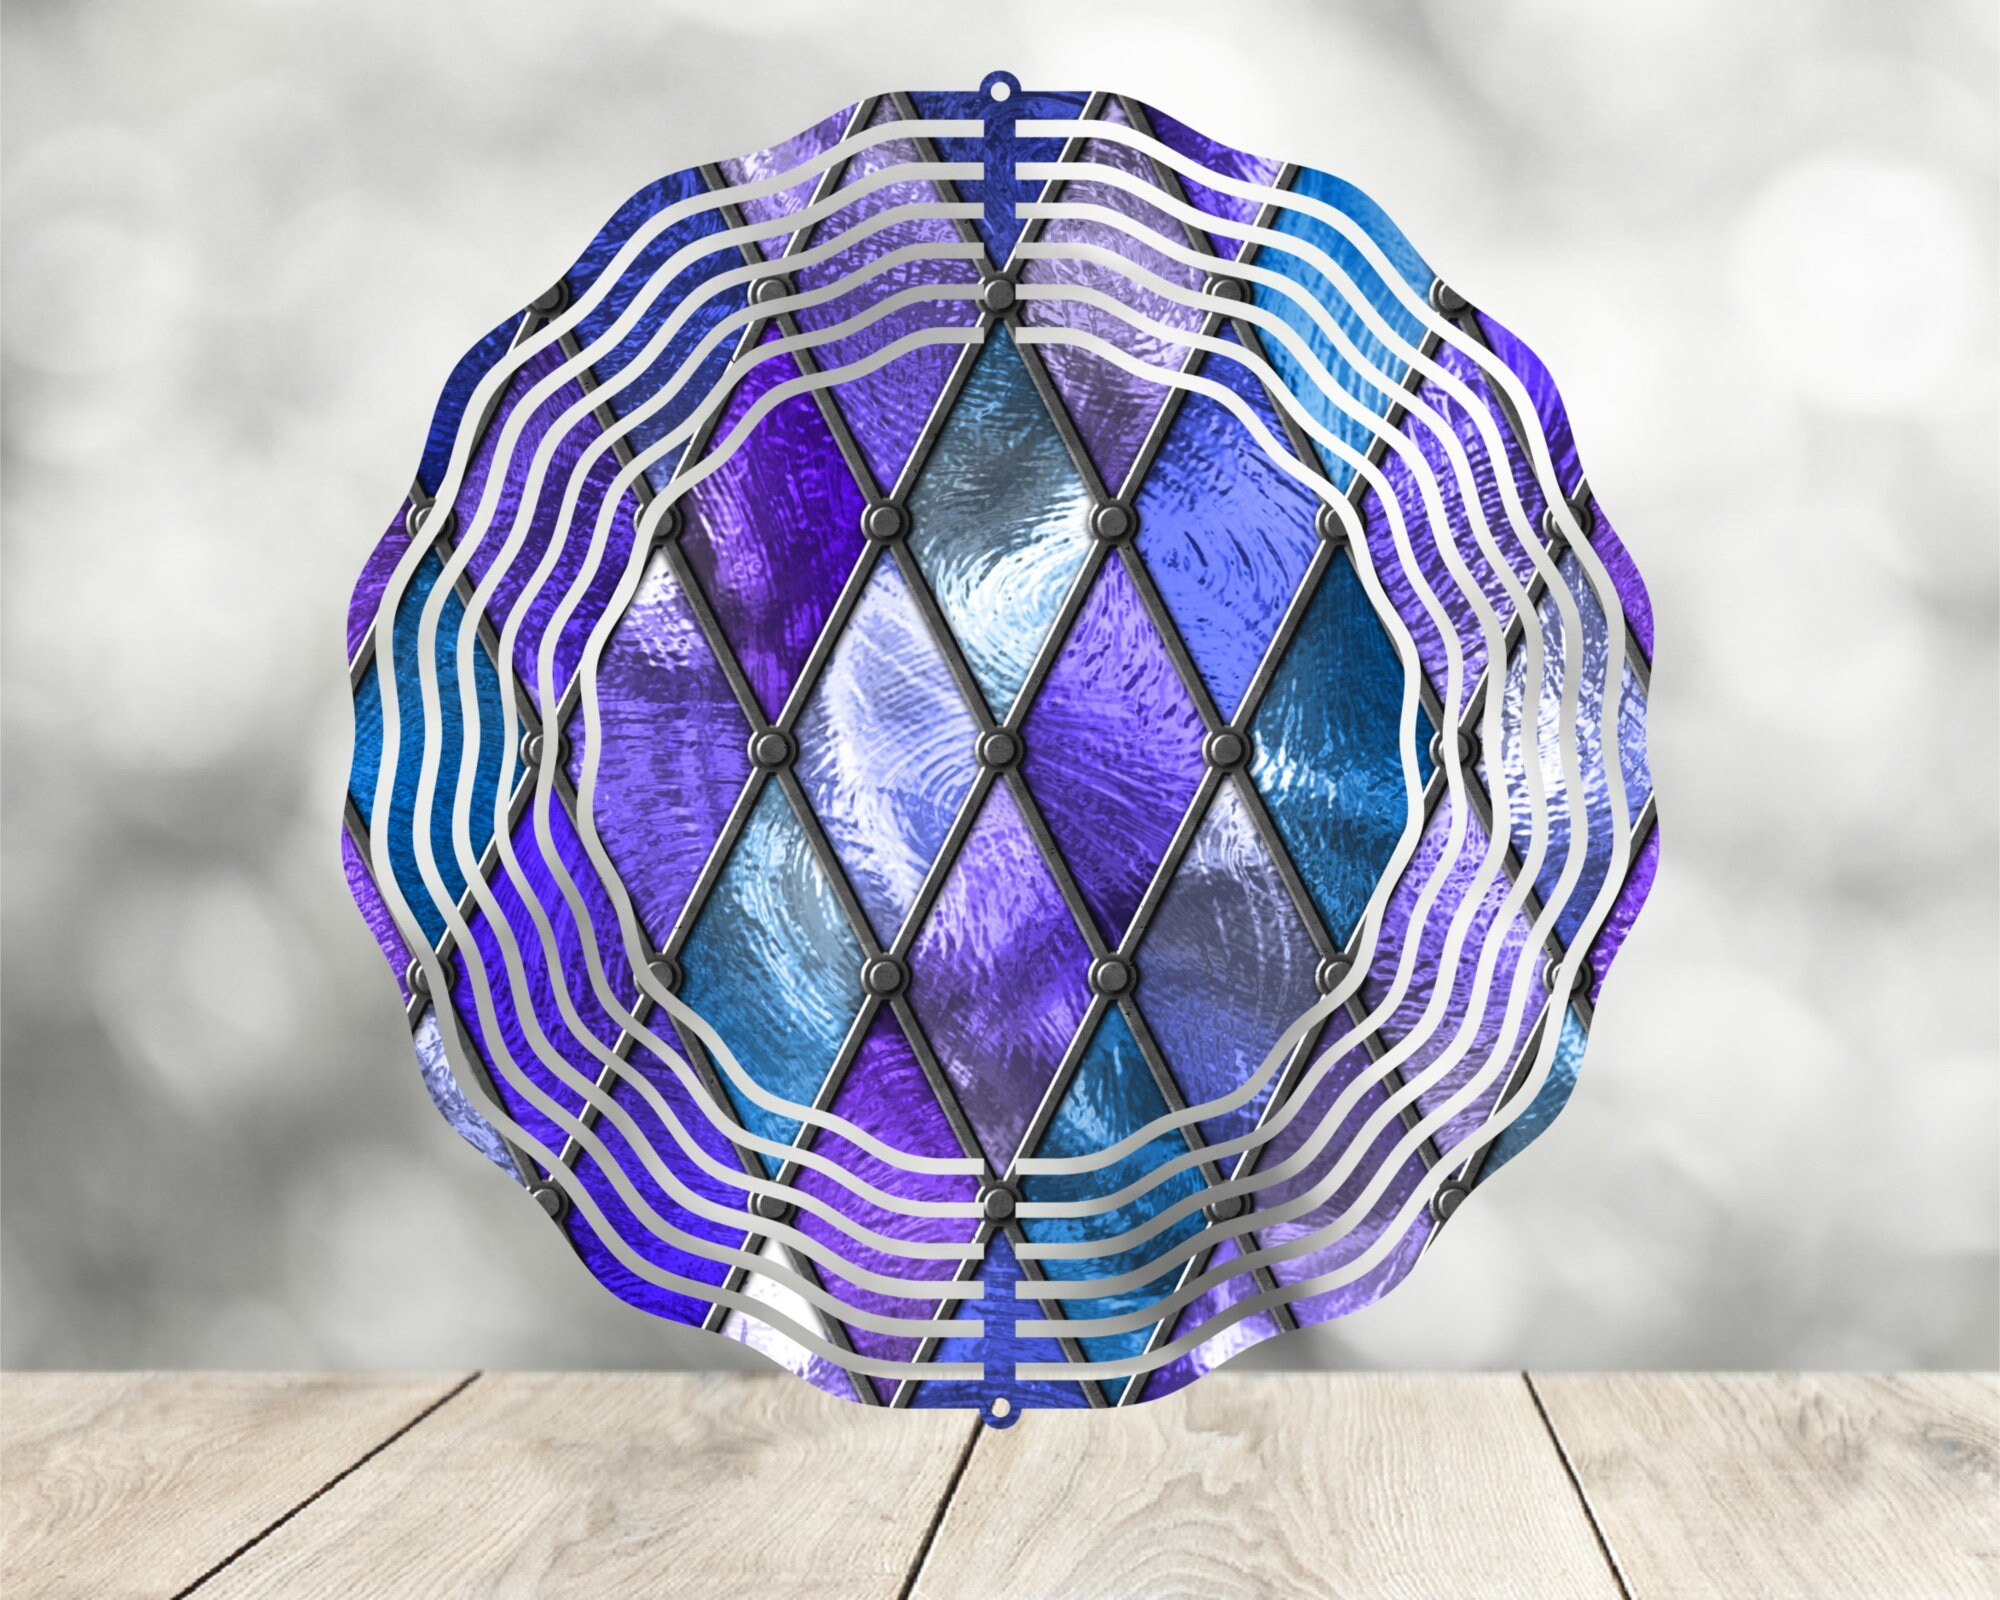 Glass Stained Wind Spinner For Yard And Garden, Outdoor Garden Yard Decoration, Garden Decor, Chime Art Gift